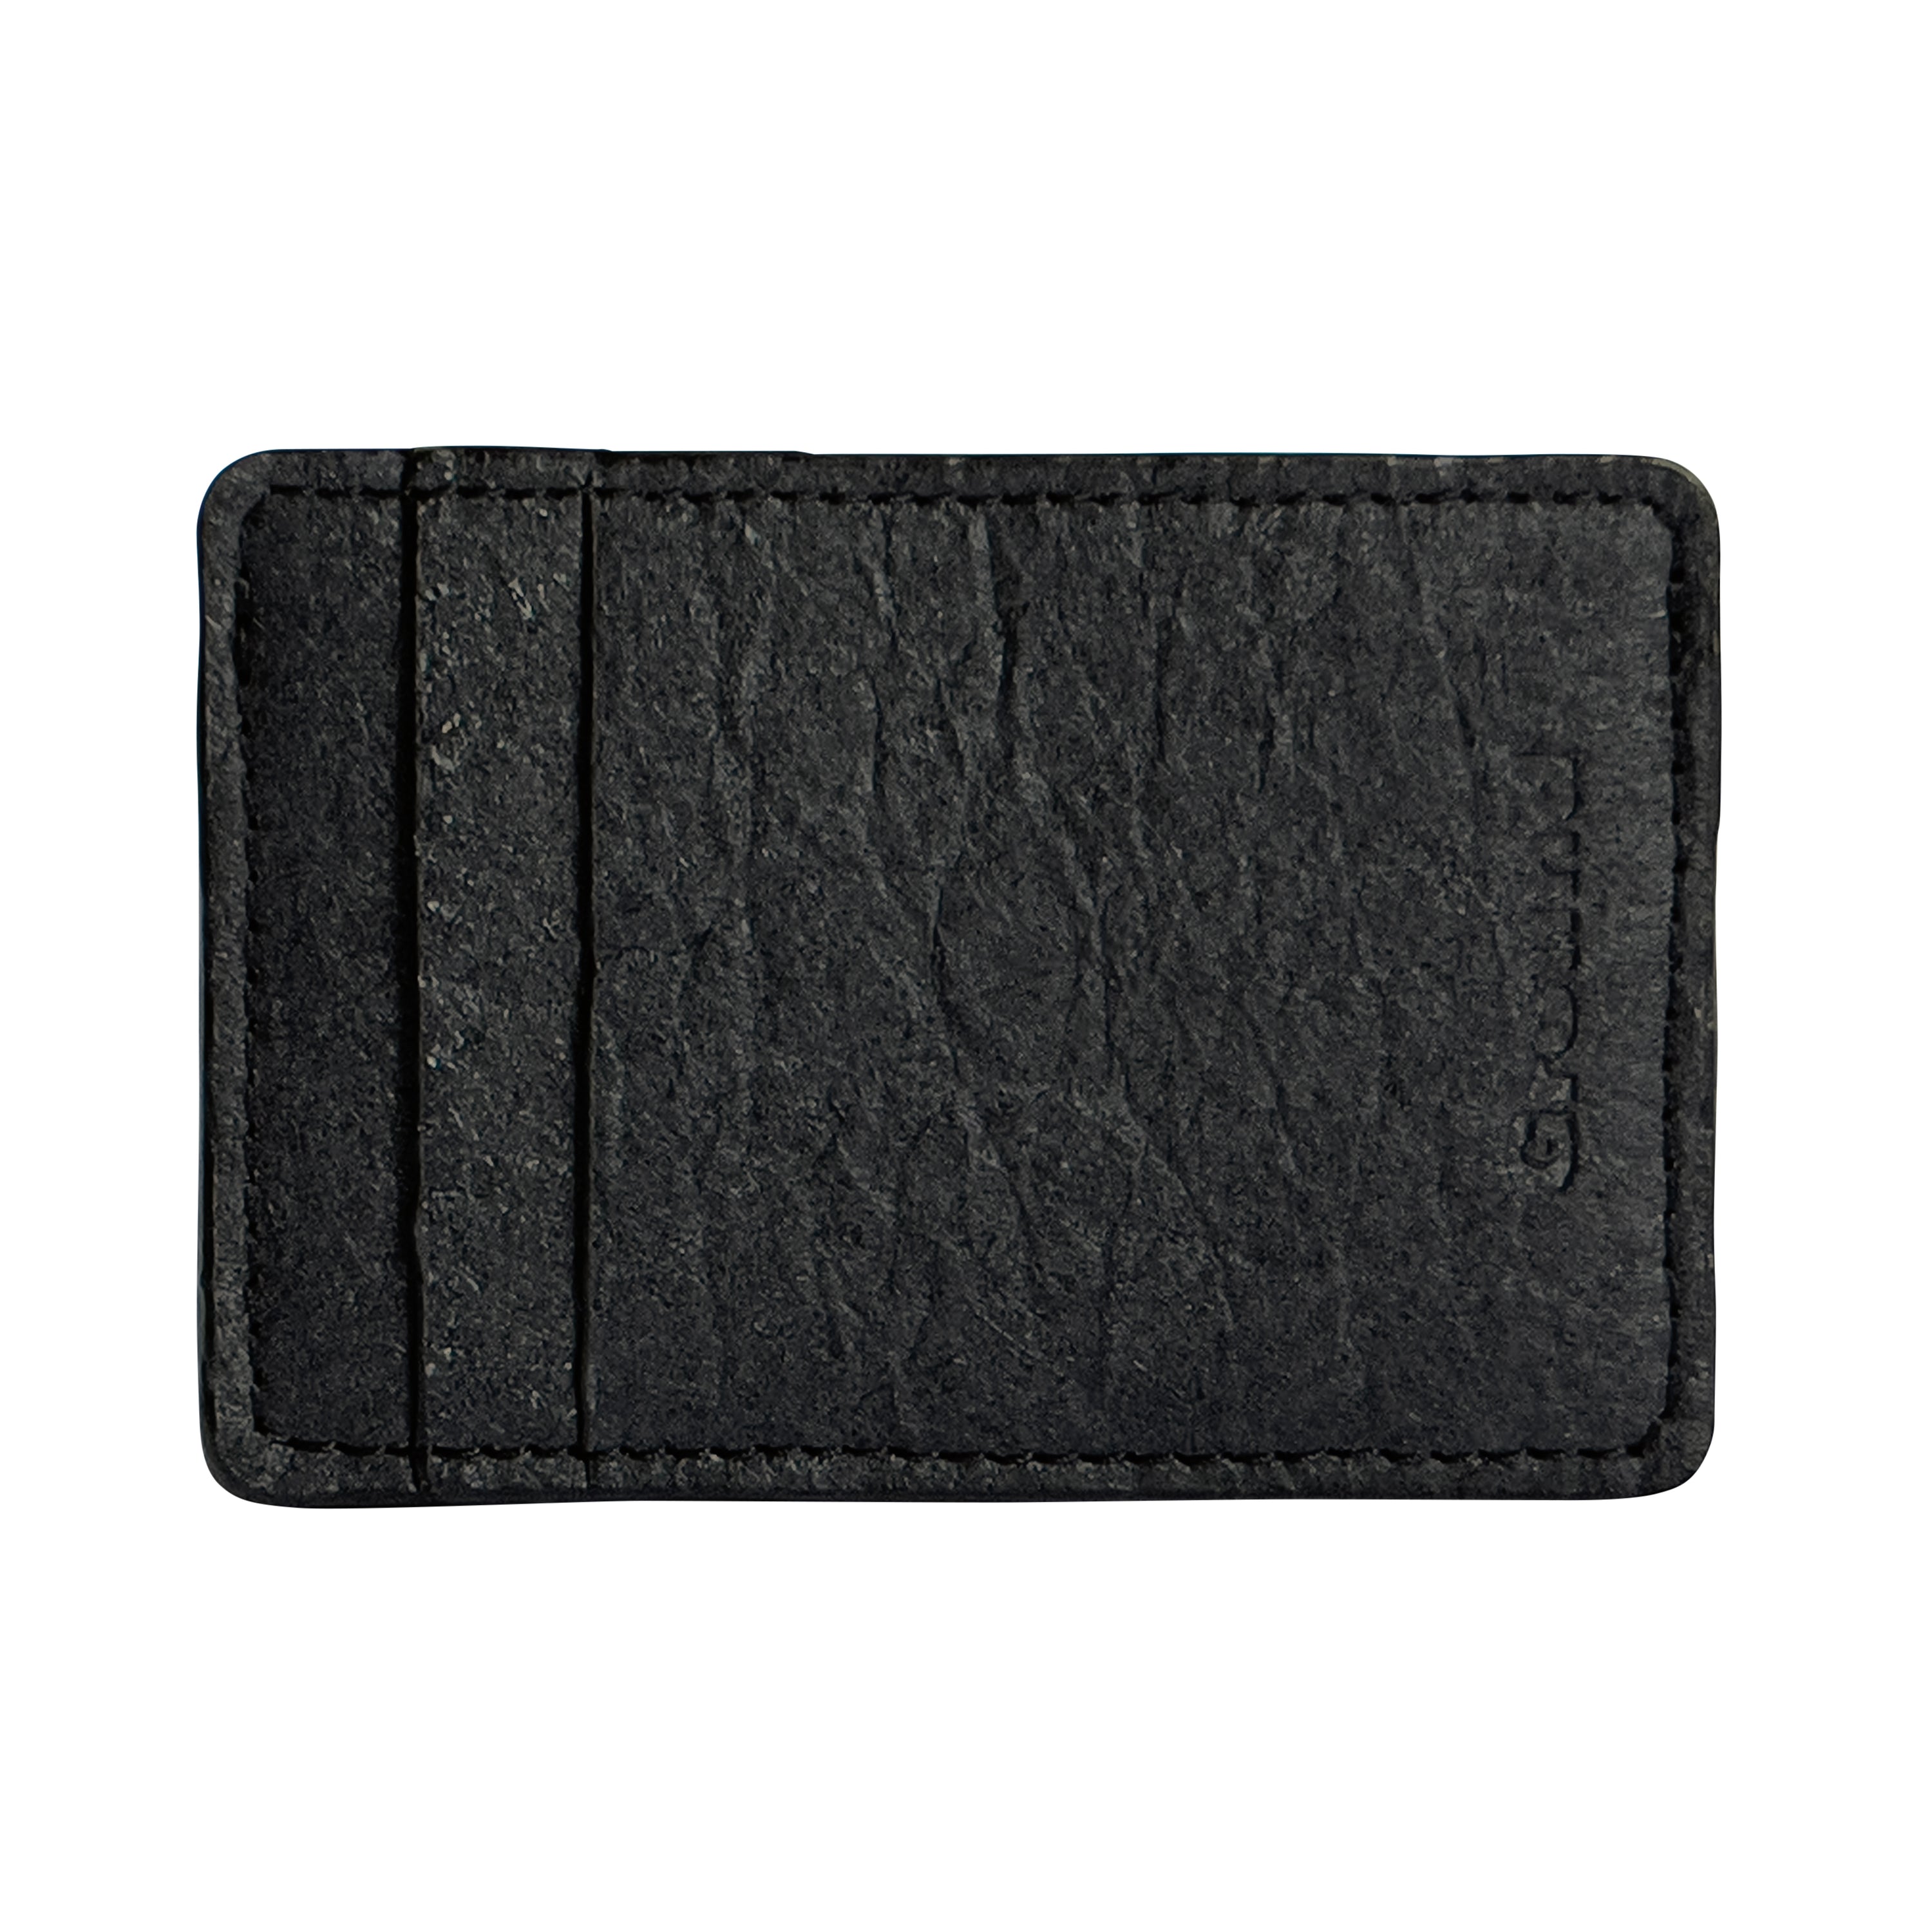 The Cardholder from the front